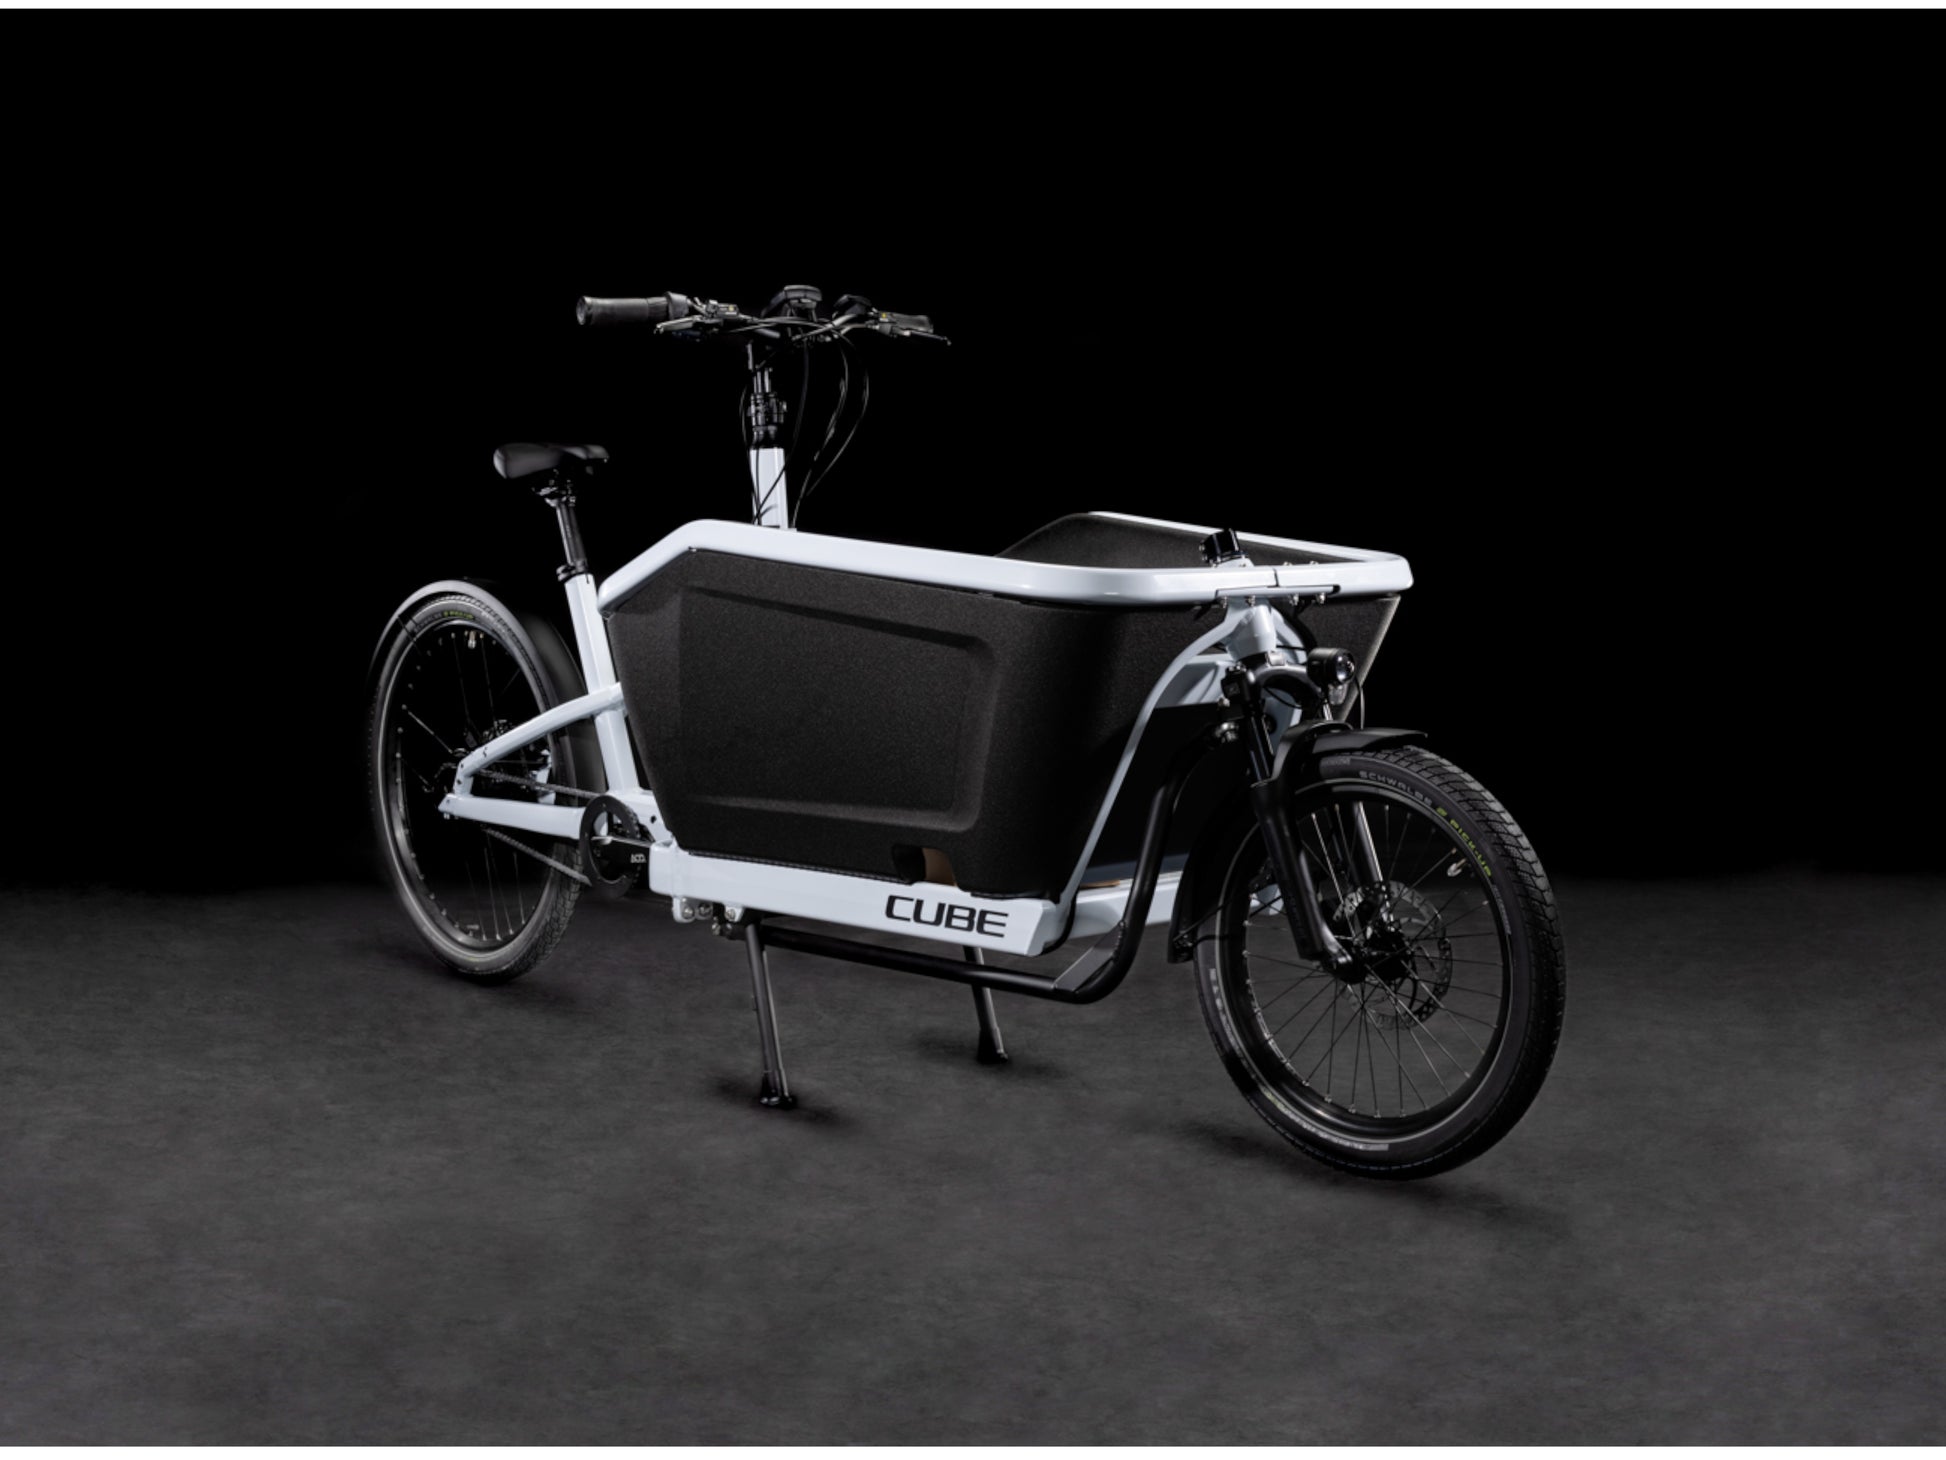 Cube Cargo Sport Hybrid 500 flashwhite n black front right side profile on Fly Rides